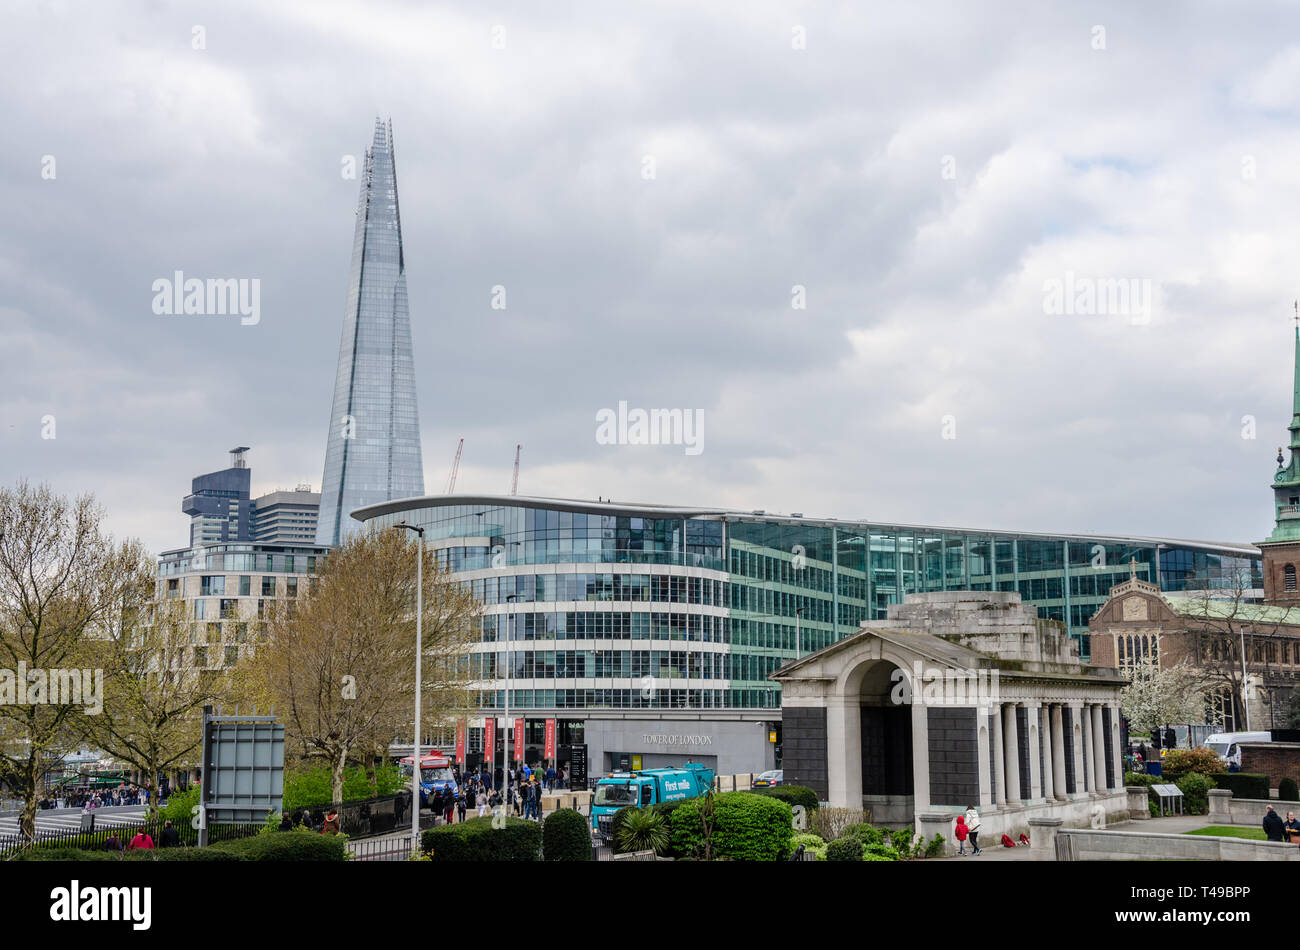 A view of modern architecture seen from Tower Hill in London including The Shard in th ebackground. Stock Photo